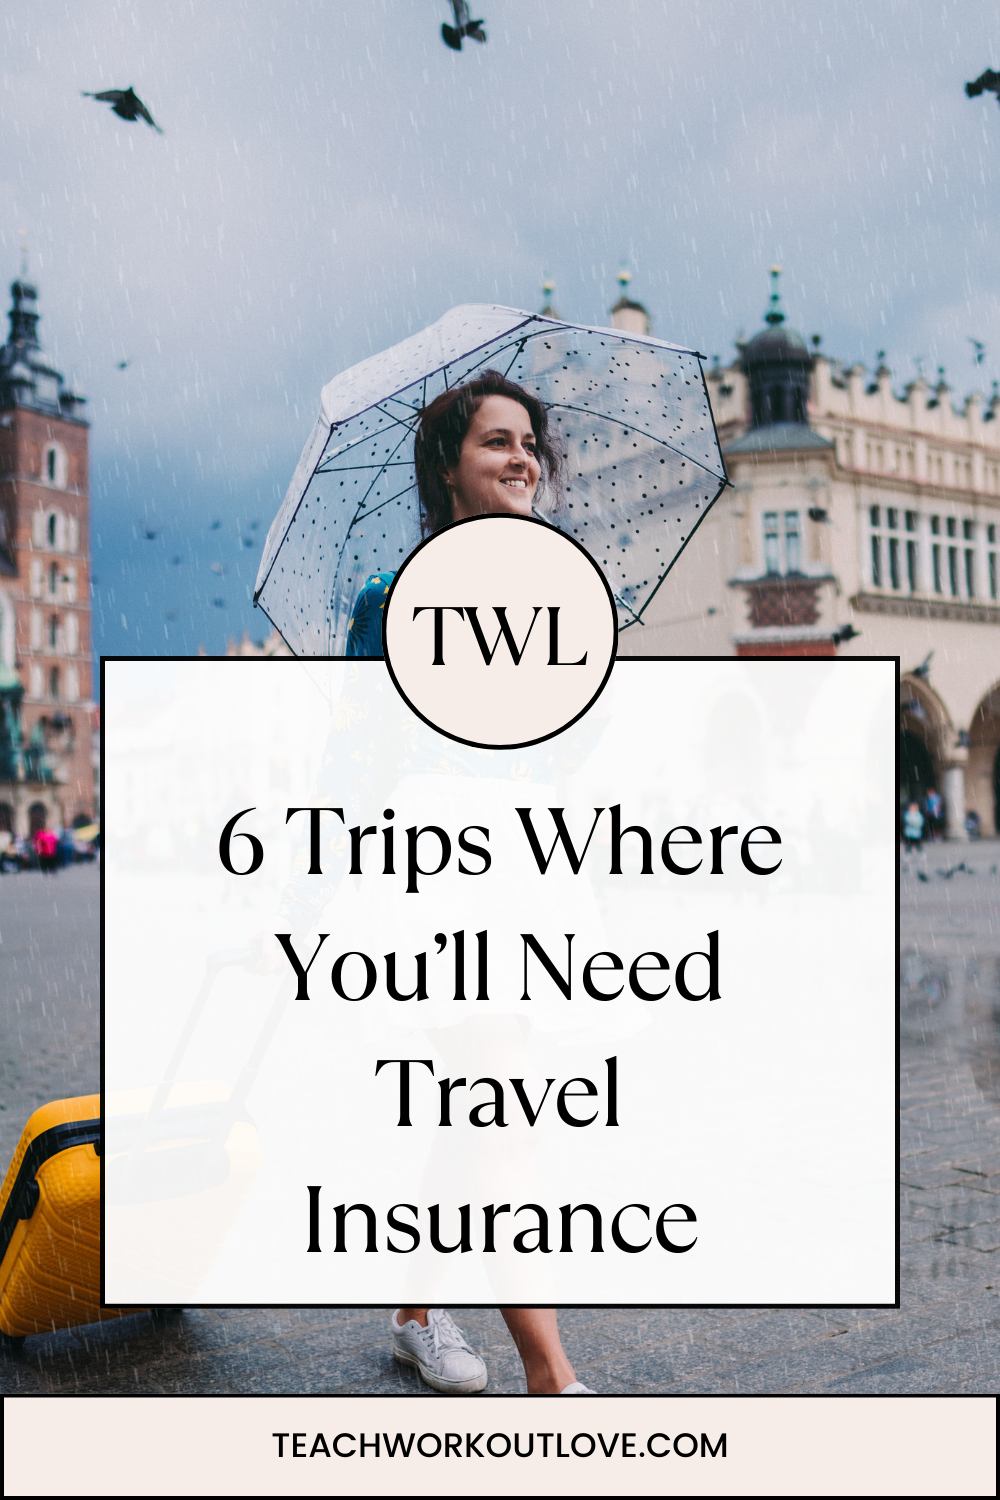 Organizing travel insurance is essential for a range of trips. It provides financial protection and peace of mind for the person or people who are traveling.